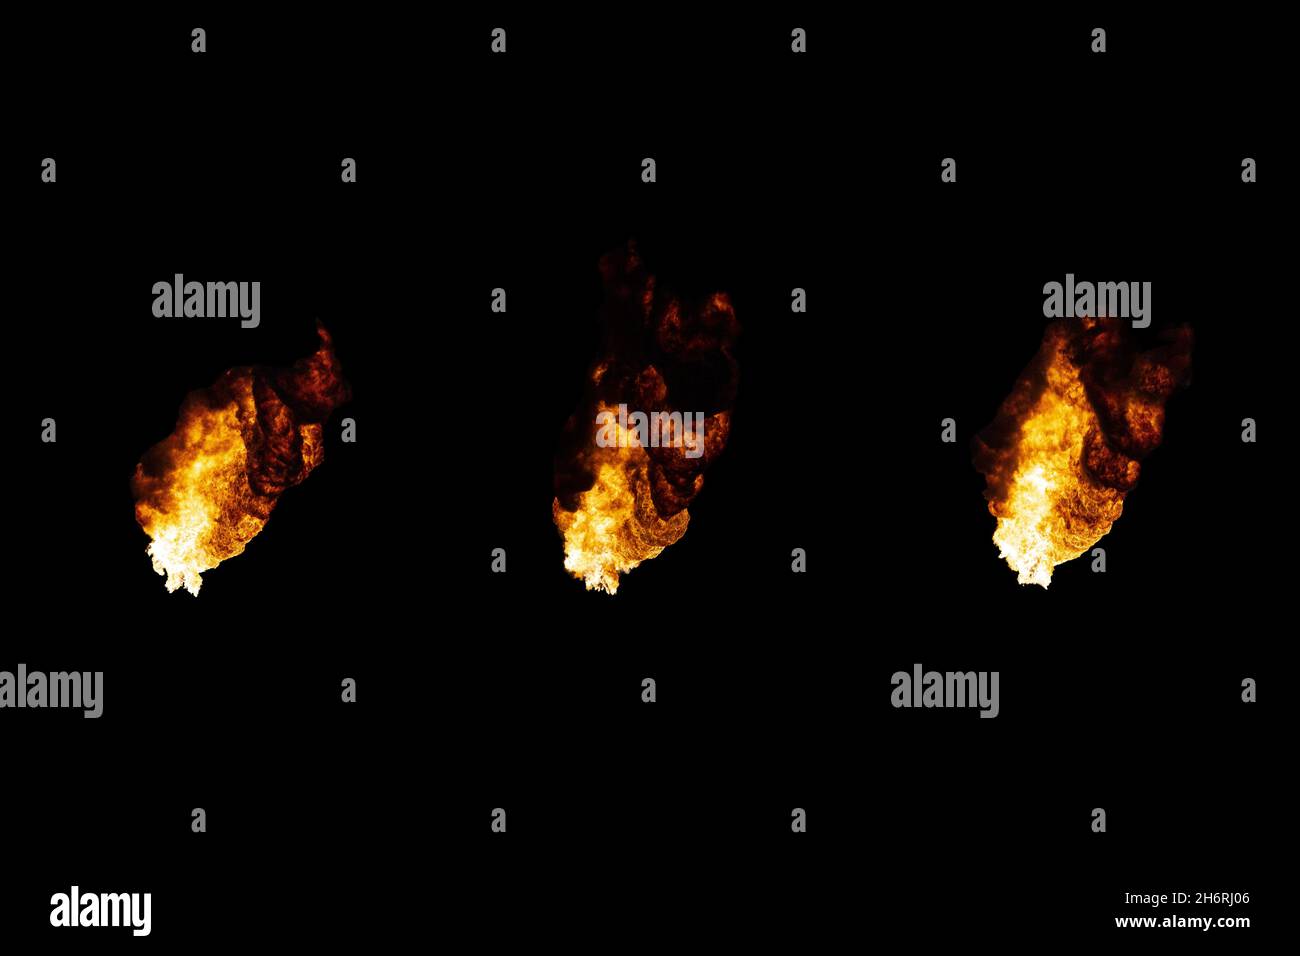 Three flames of oil torches isolated on a black background. Stock Photo